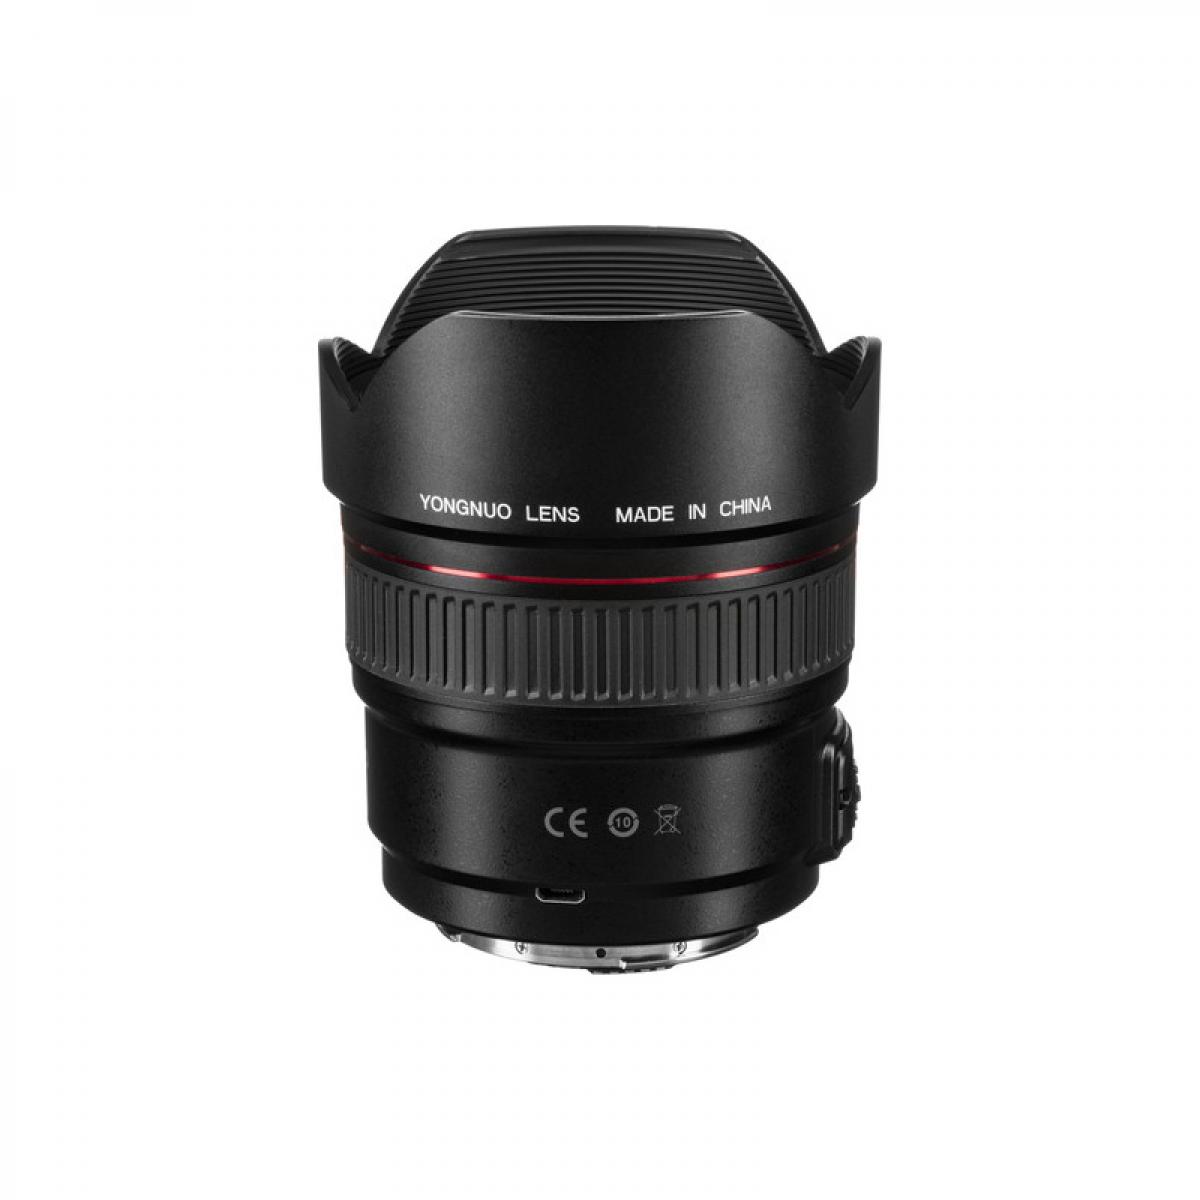 Yongnuo YN 14mm f/2.8 Super Wide-Angle Fixed Focus Lens Autofocus 